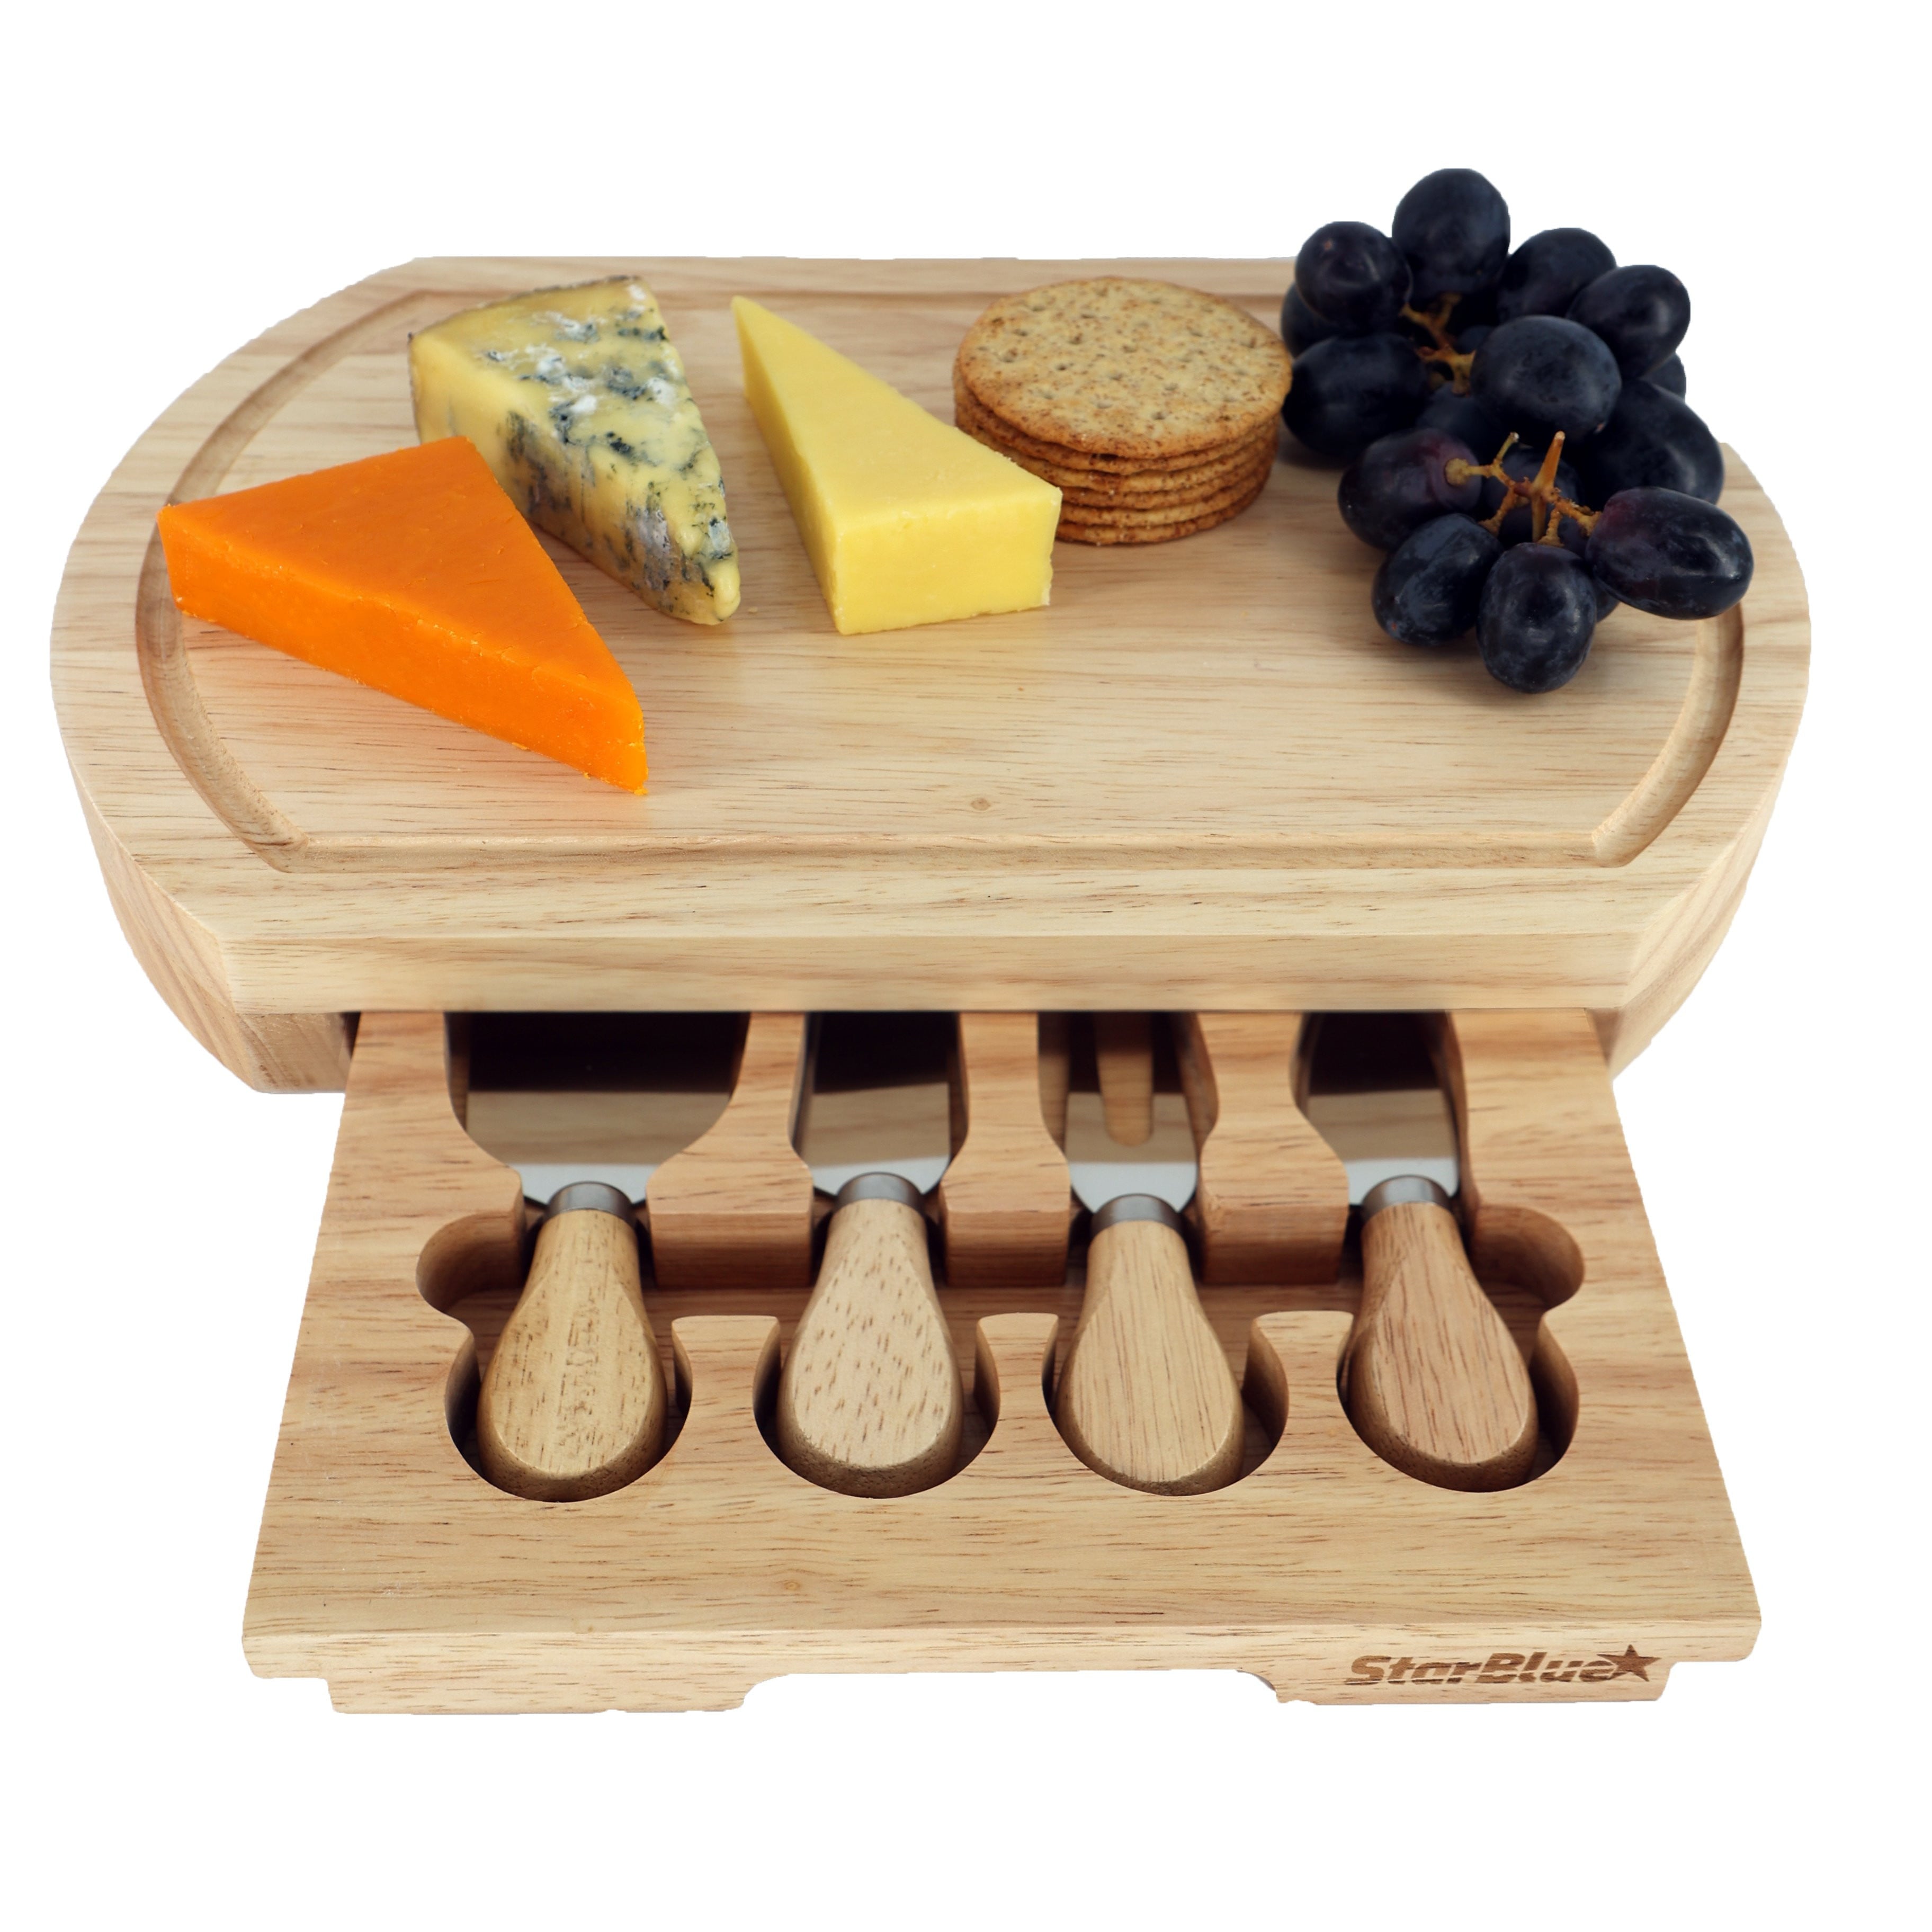 Cheese Board Set with 4 Knives and Slide Out Drawer by StarBlue